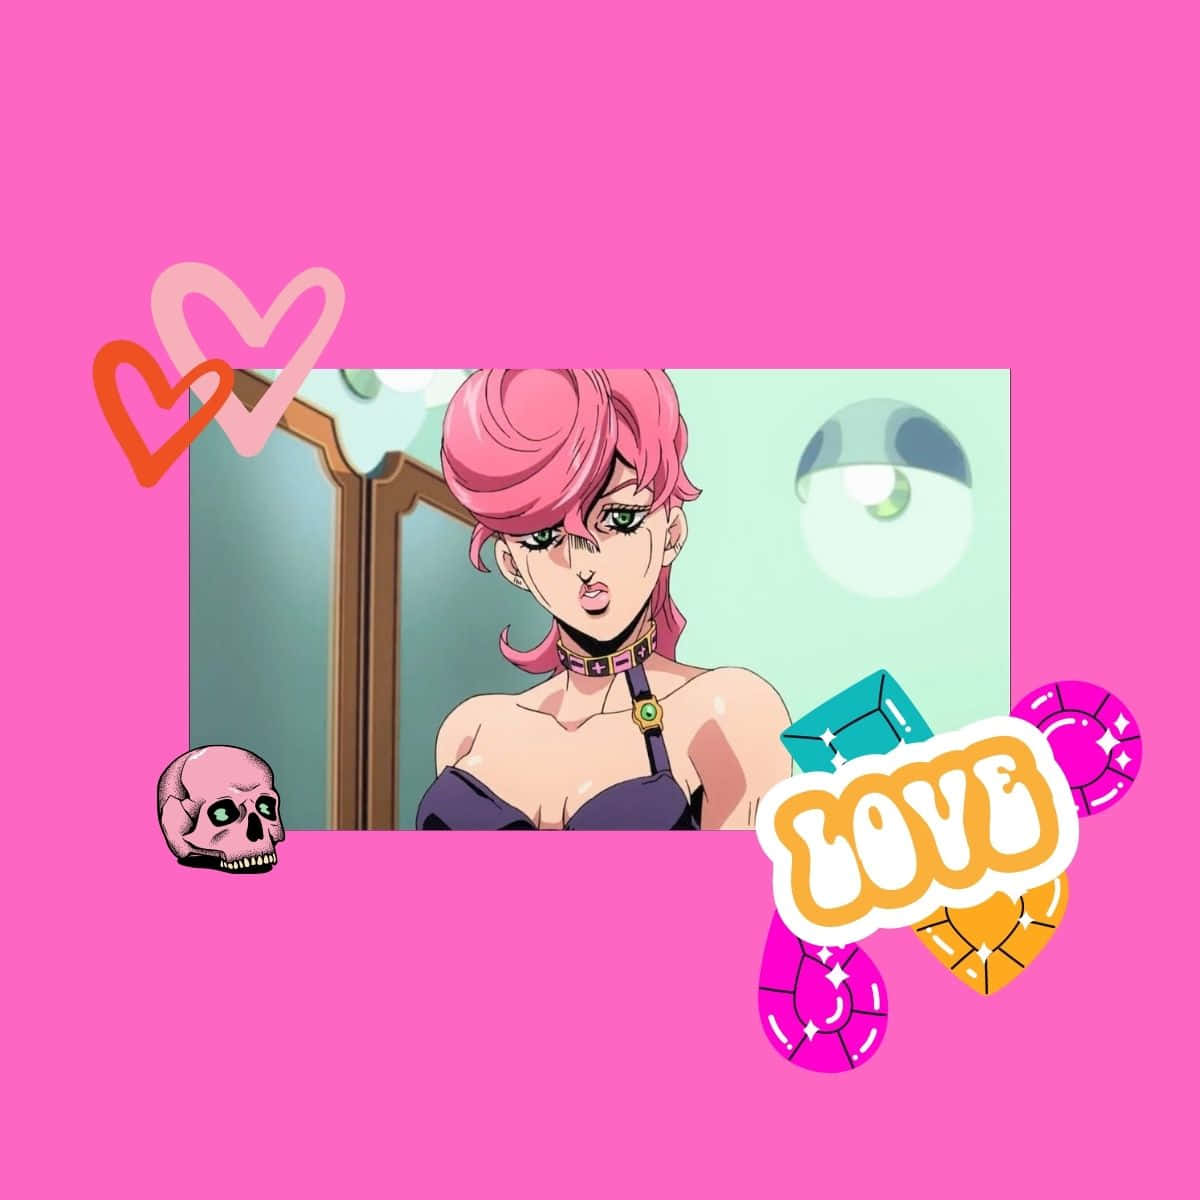 Stylish Trish Una posing with her Stand in a vibrant and colorful illustration Wallpaper